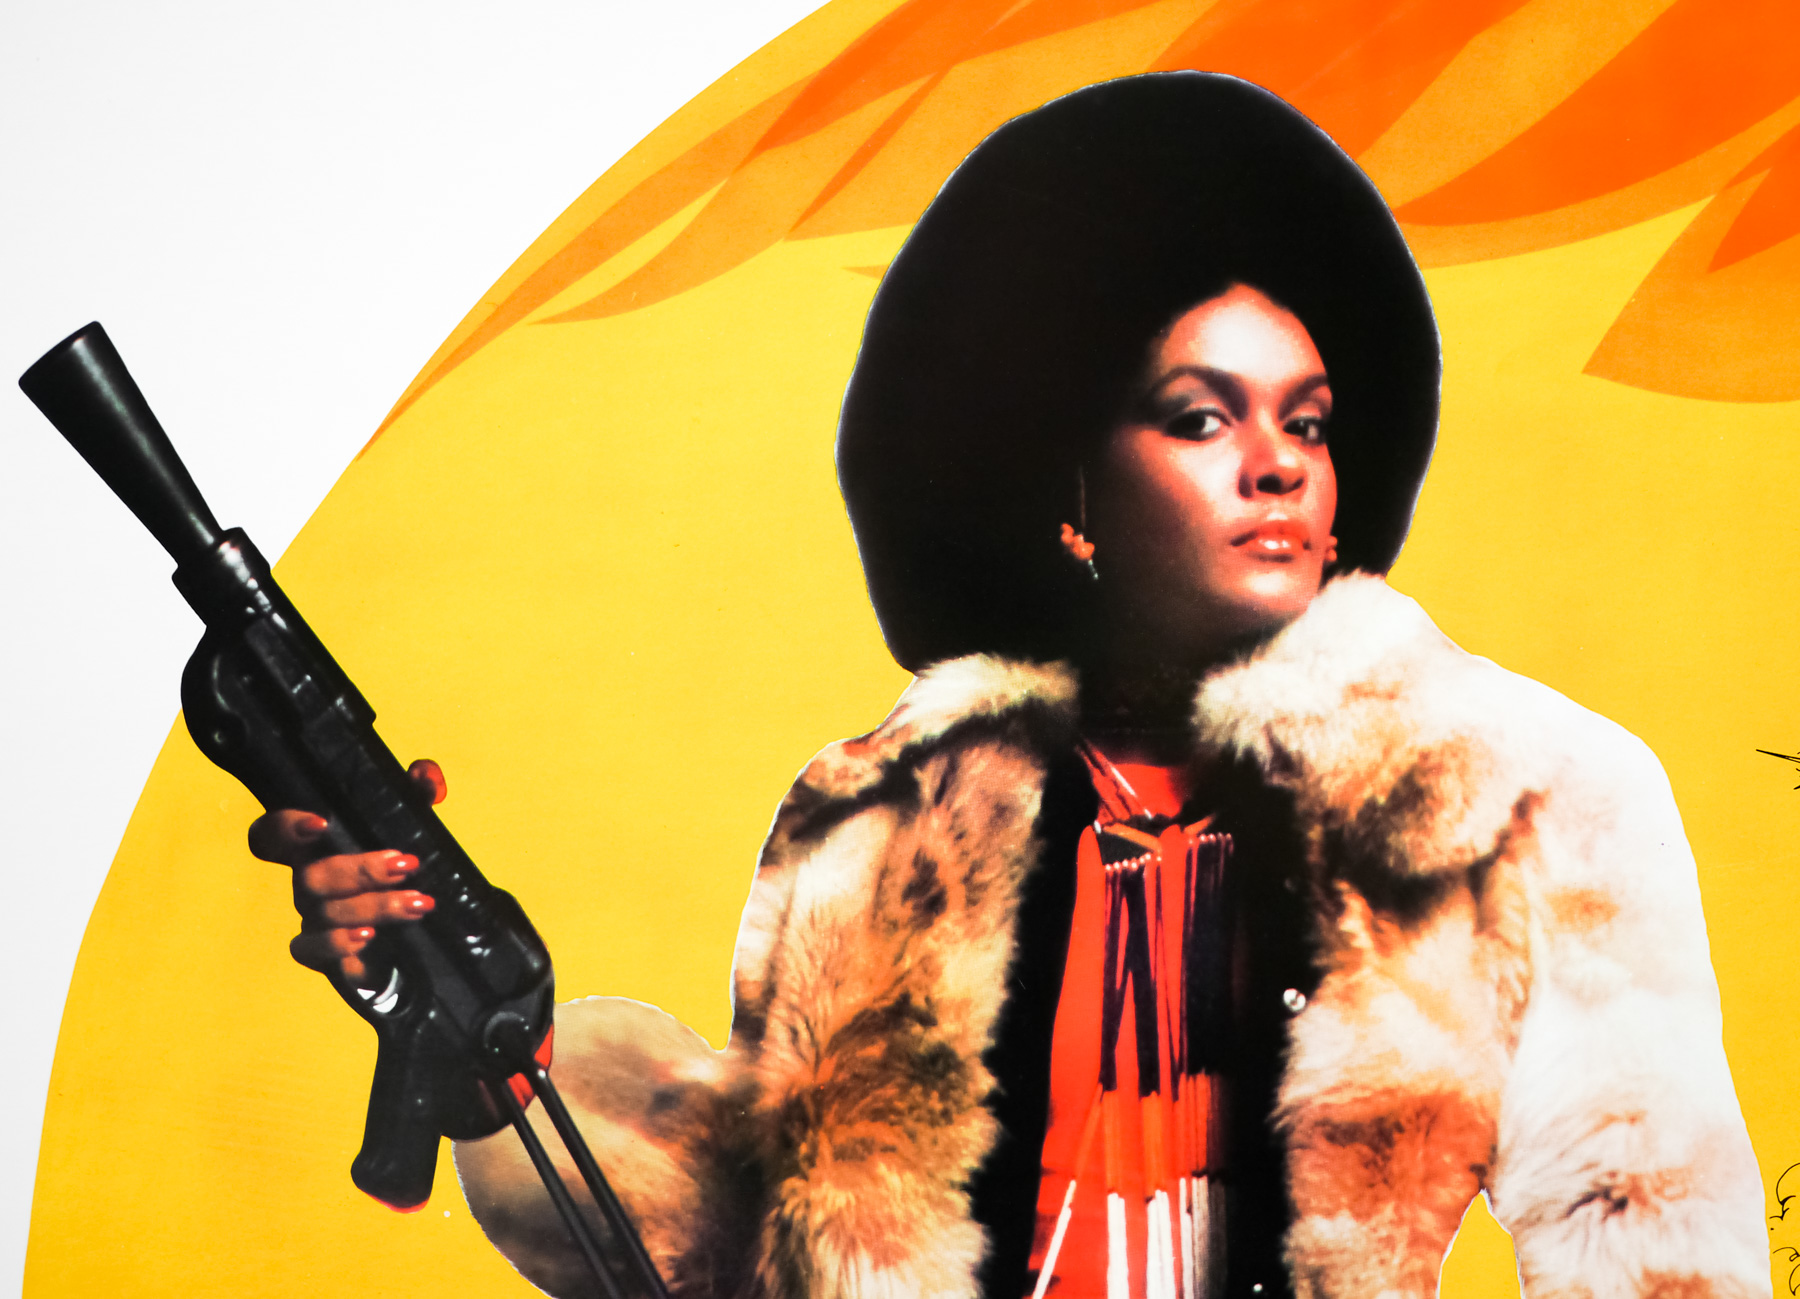 FREE SHIPPING MOVIE REPRO LW12 N POSTER CLEOPATRA JONES 